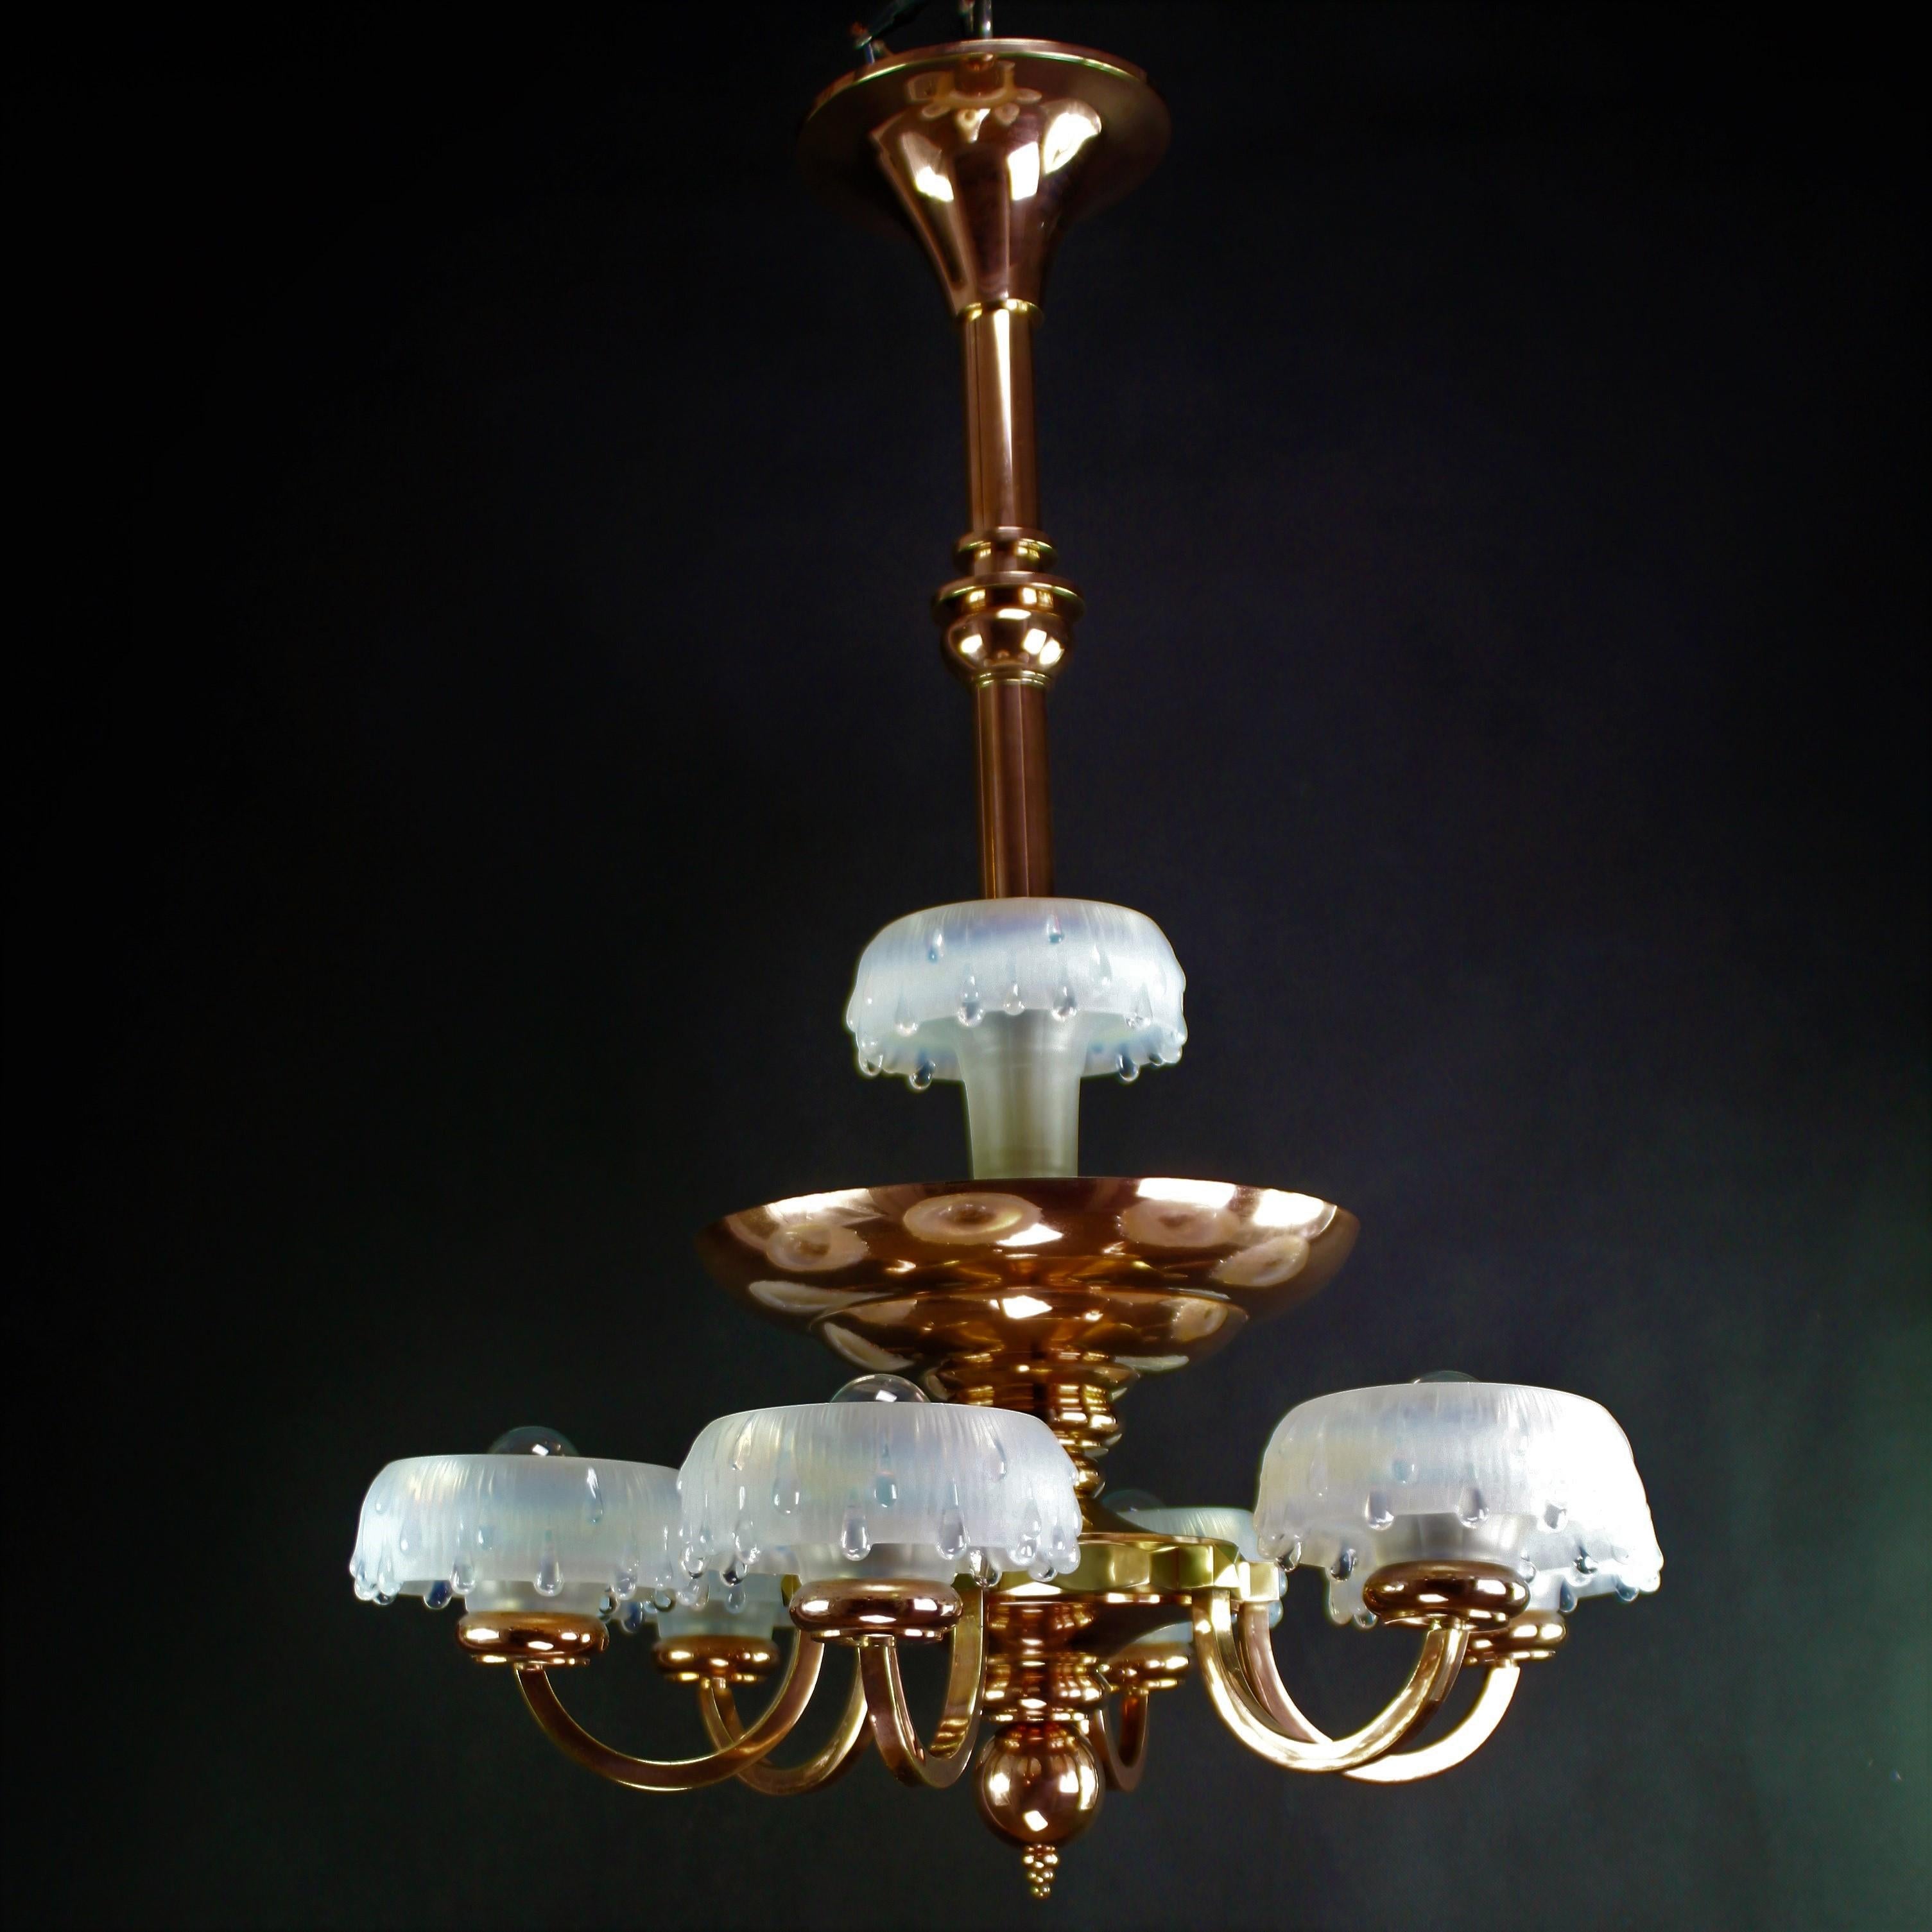 Art Deco chandelier with EZAN Glasses- 1930s

The Ezan Art Deco chandelier is an elegant and stylish lighting piece in Art Deco style. It is made of high-quality copper and has unique design elements that make the chandelier a special work of